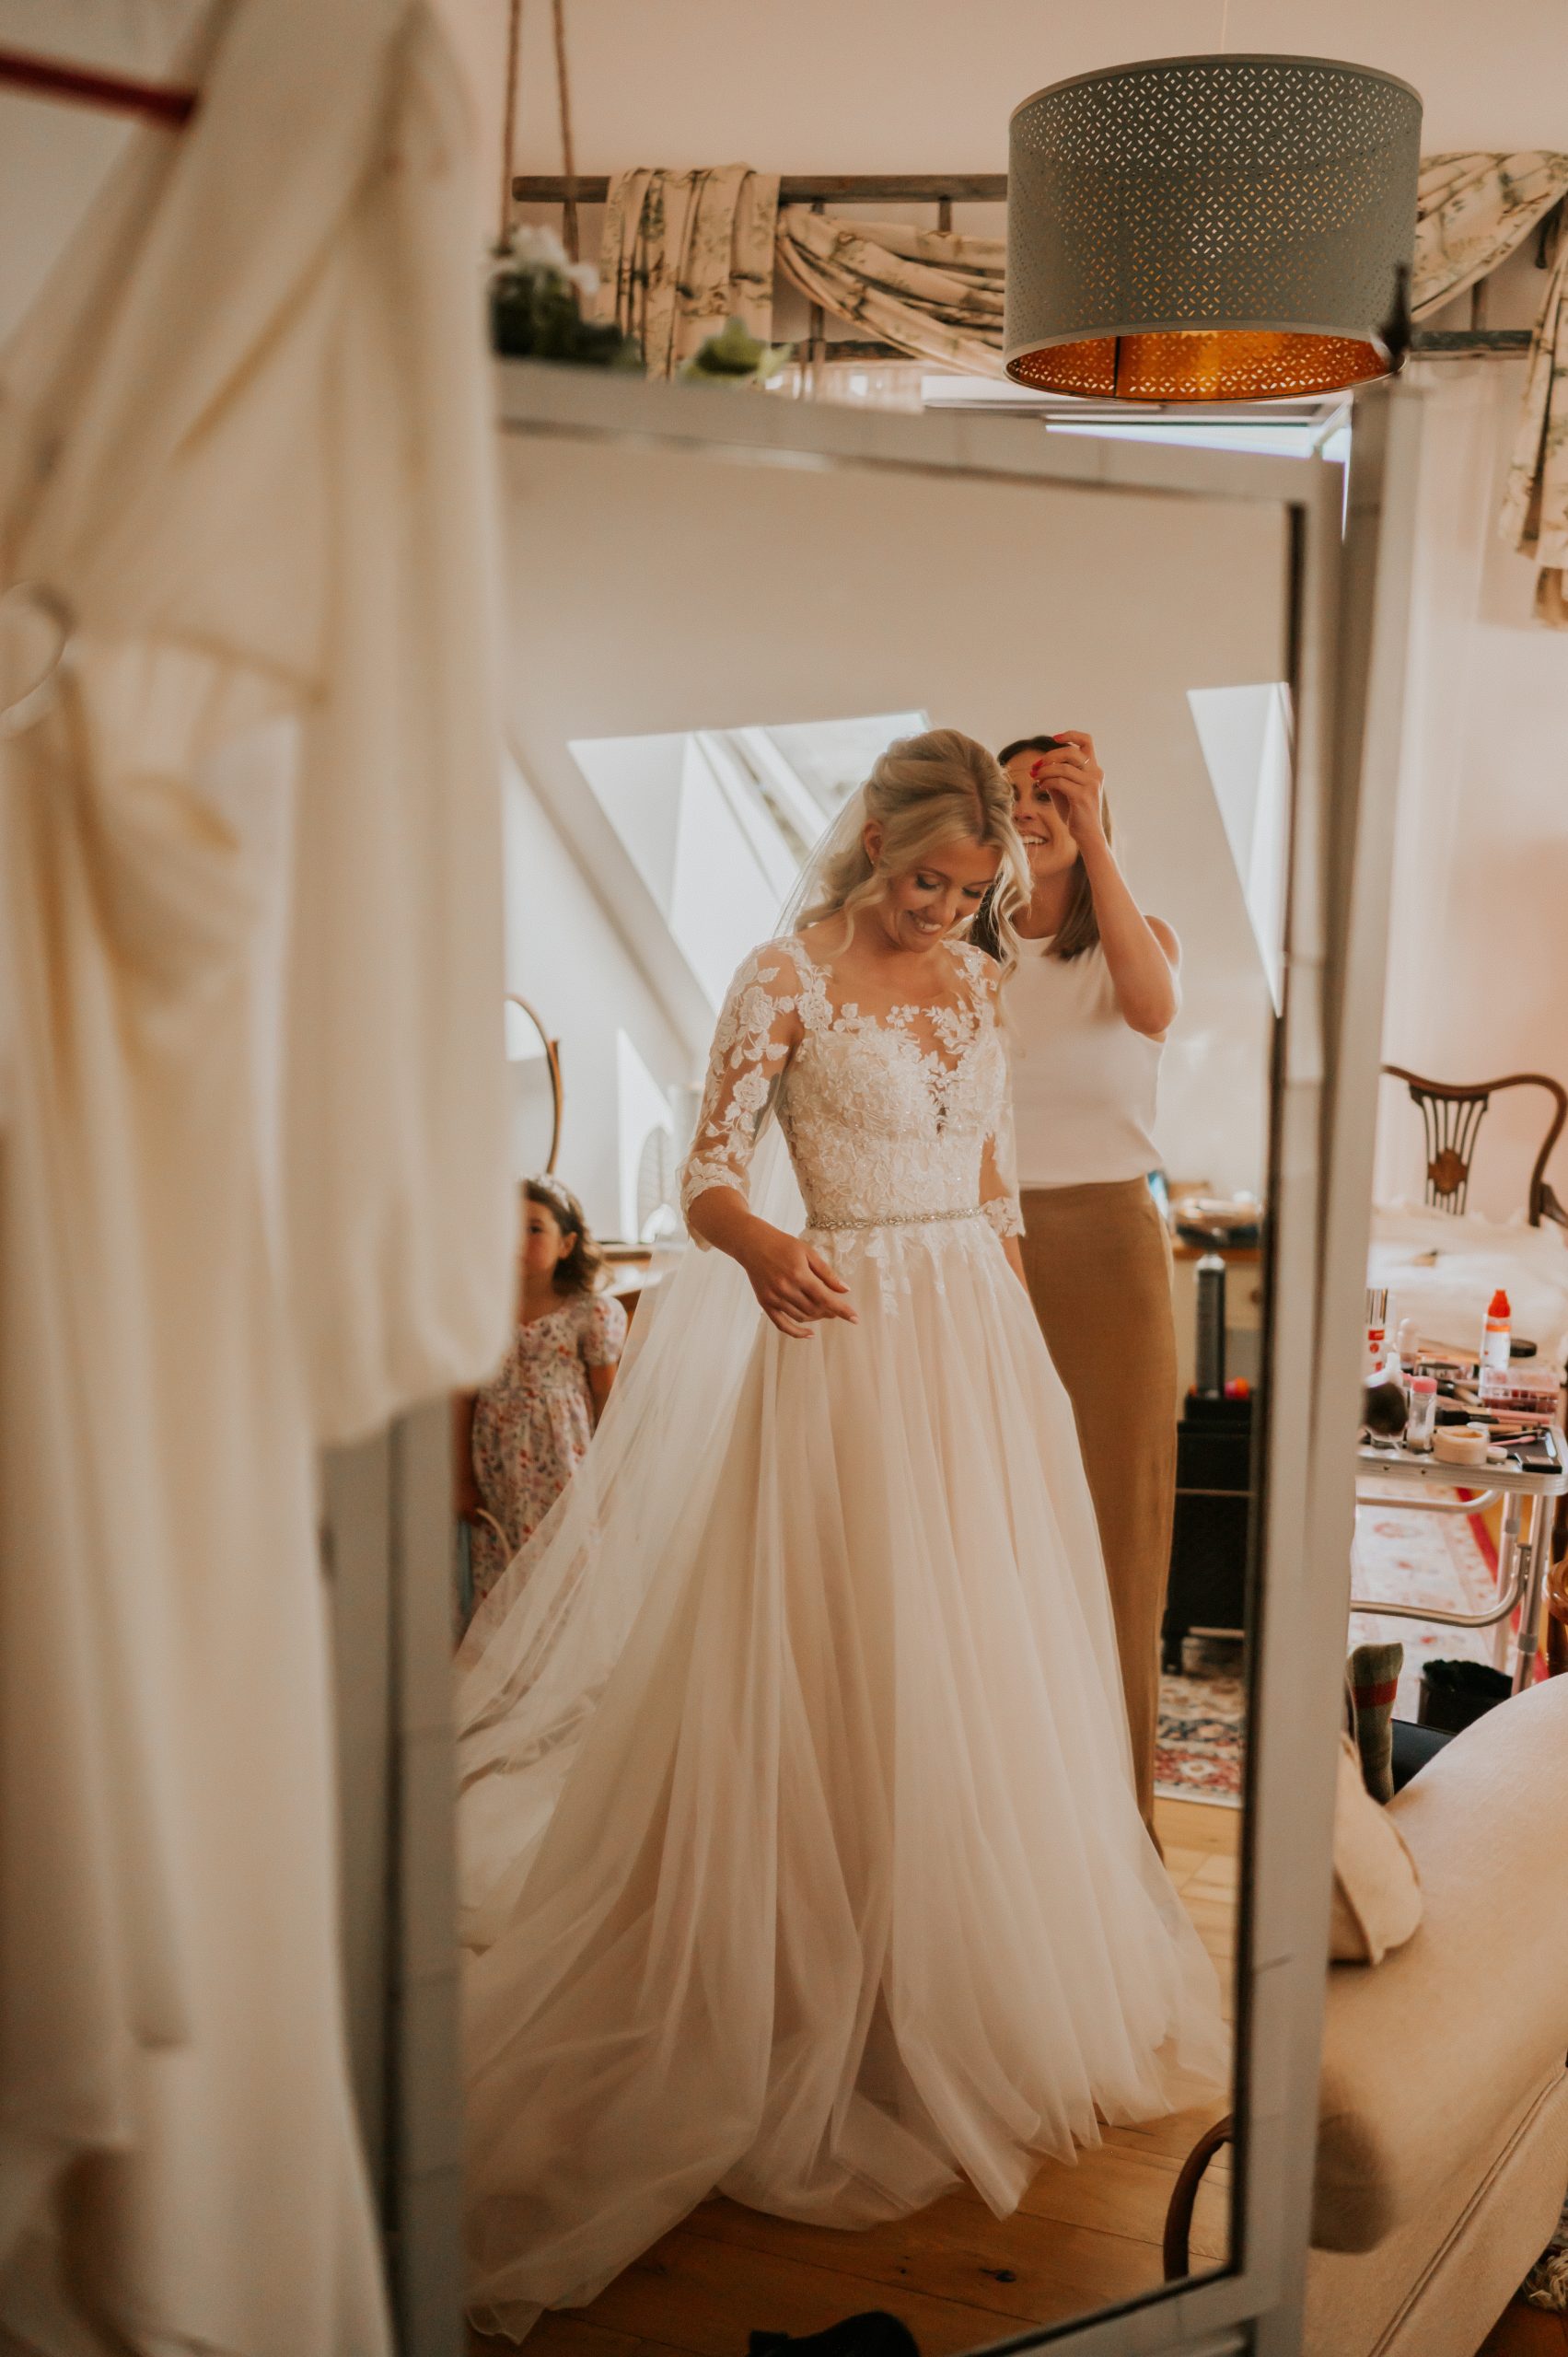 Charlotte preparing in the bridal suits